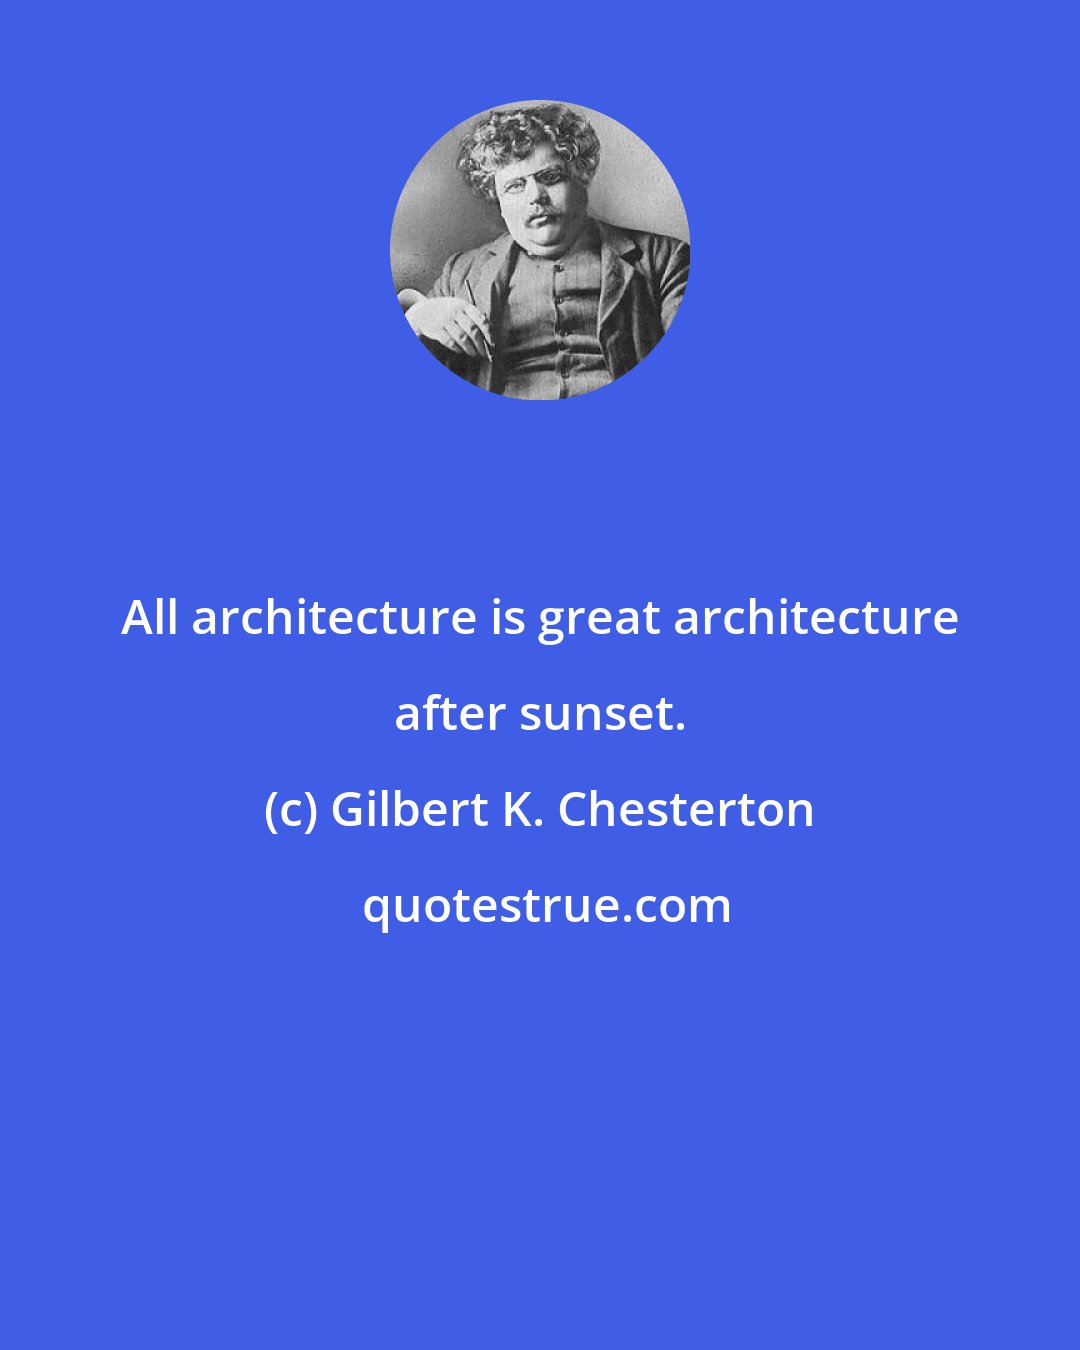 Gilbert K. Chesterton: All architecture is great architecture after sunset.